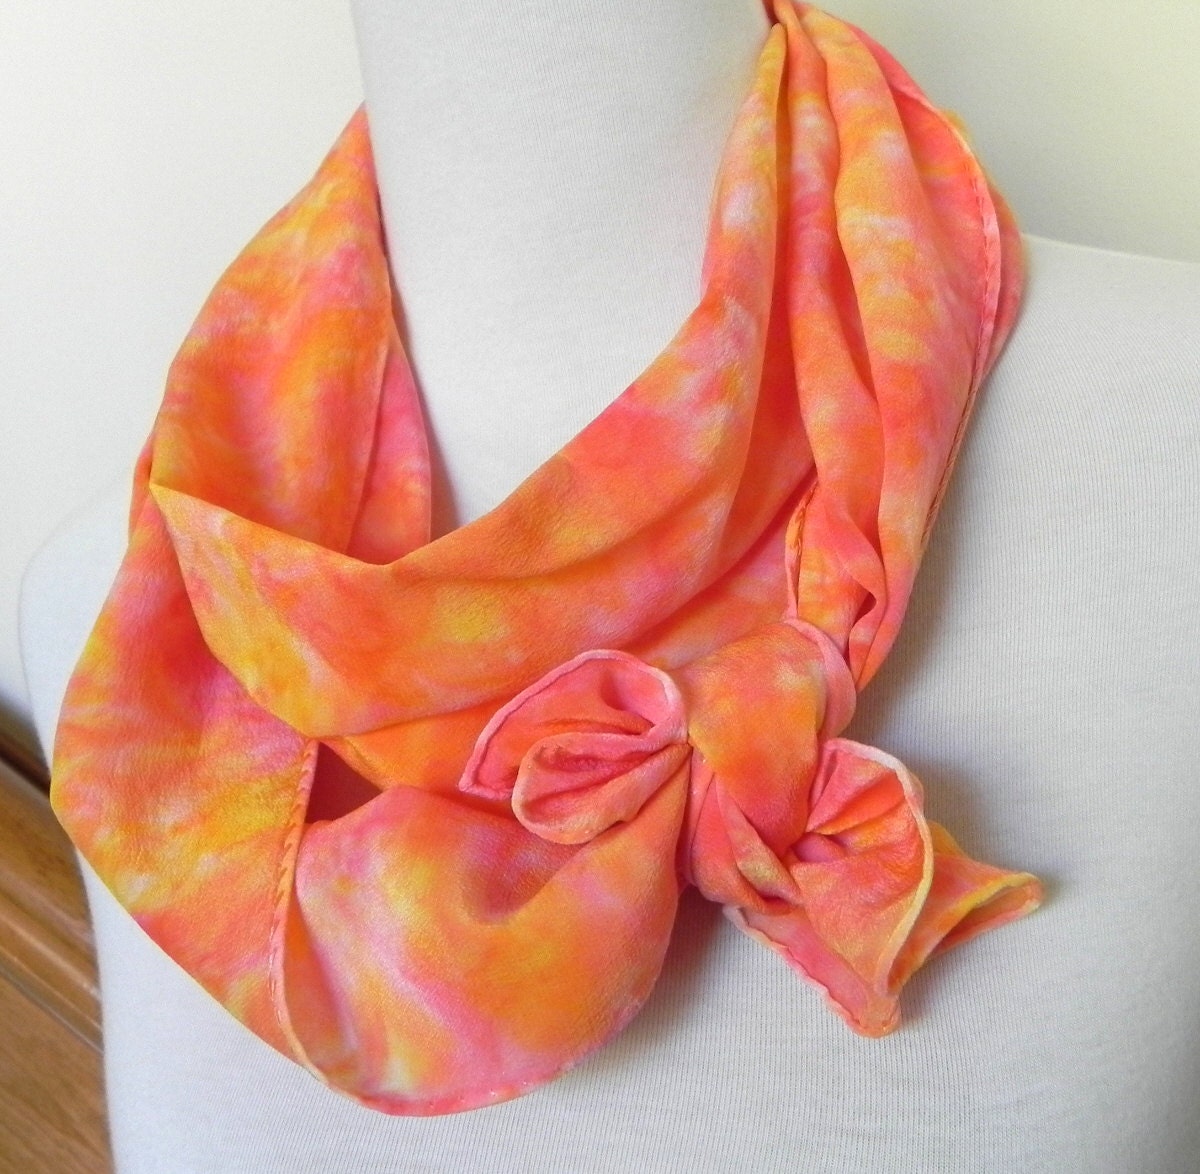 Hand Dyed Long Silk Scarf of Crepe de Chine in Peach, Nectarine, and Golden Yellow, Ready to Ship - RosyDaysScarves